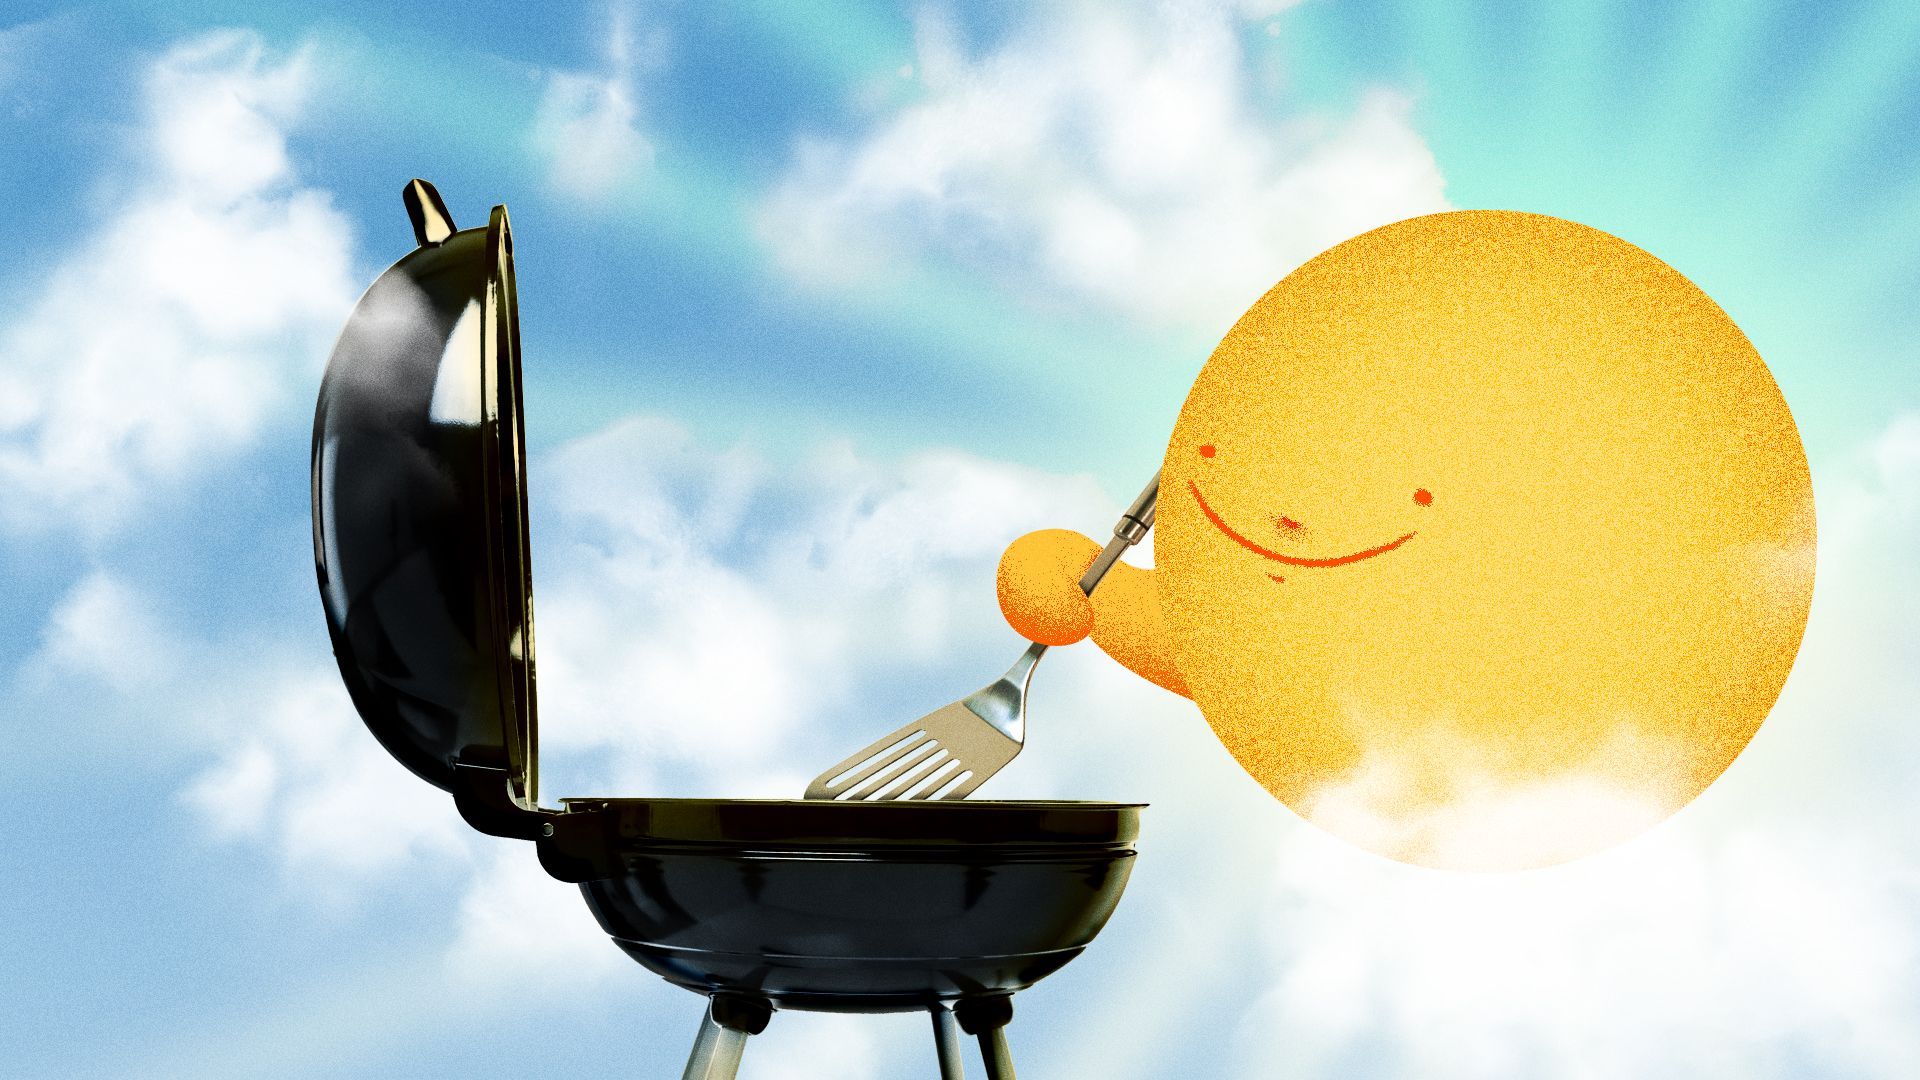 Illustration of a sun barbecuing on the grill.